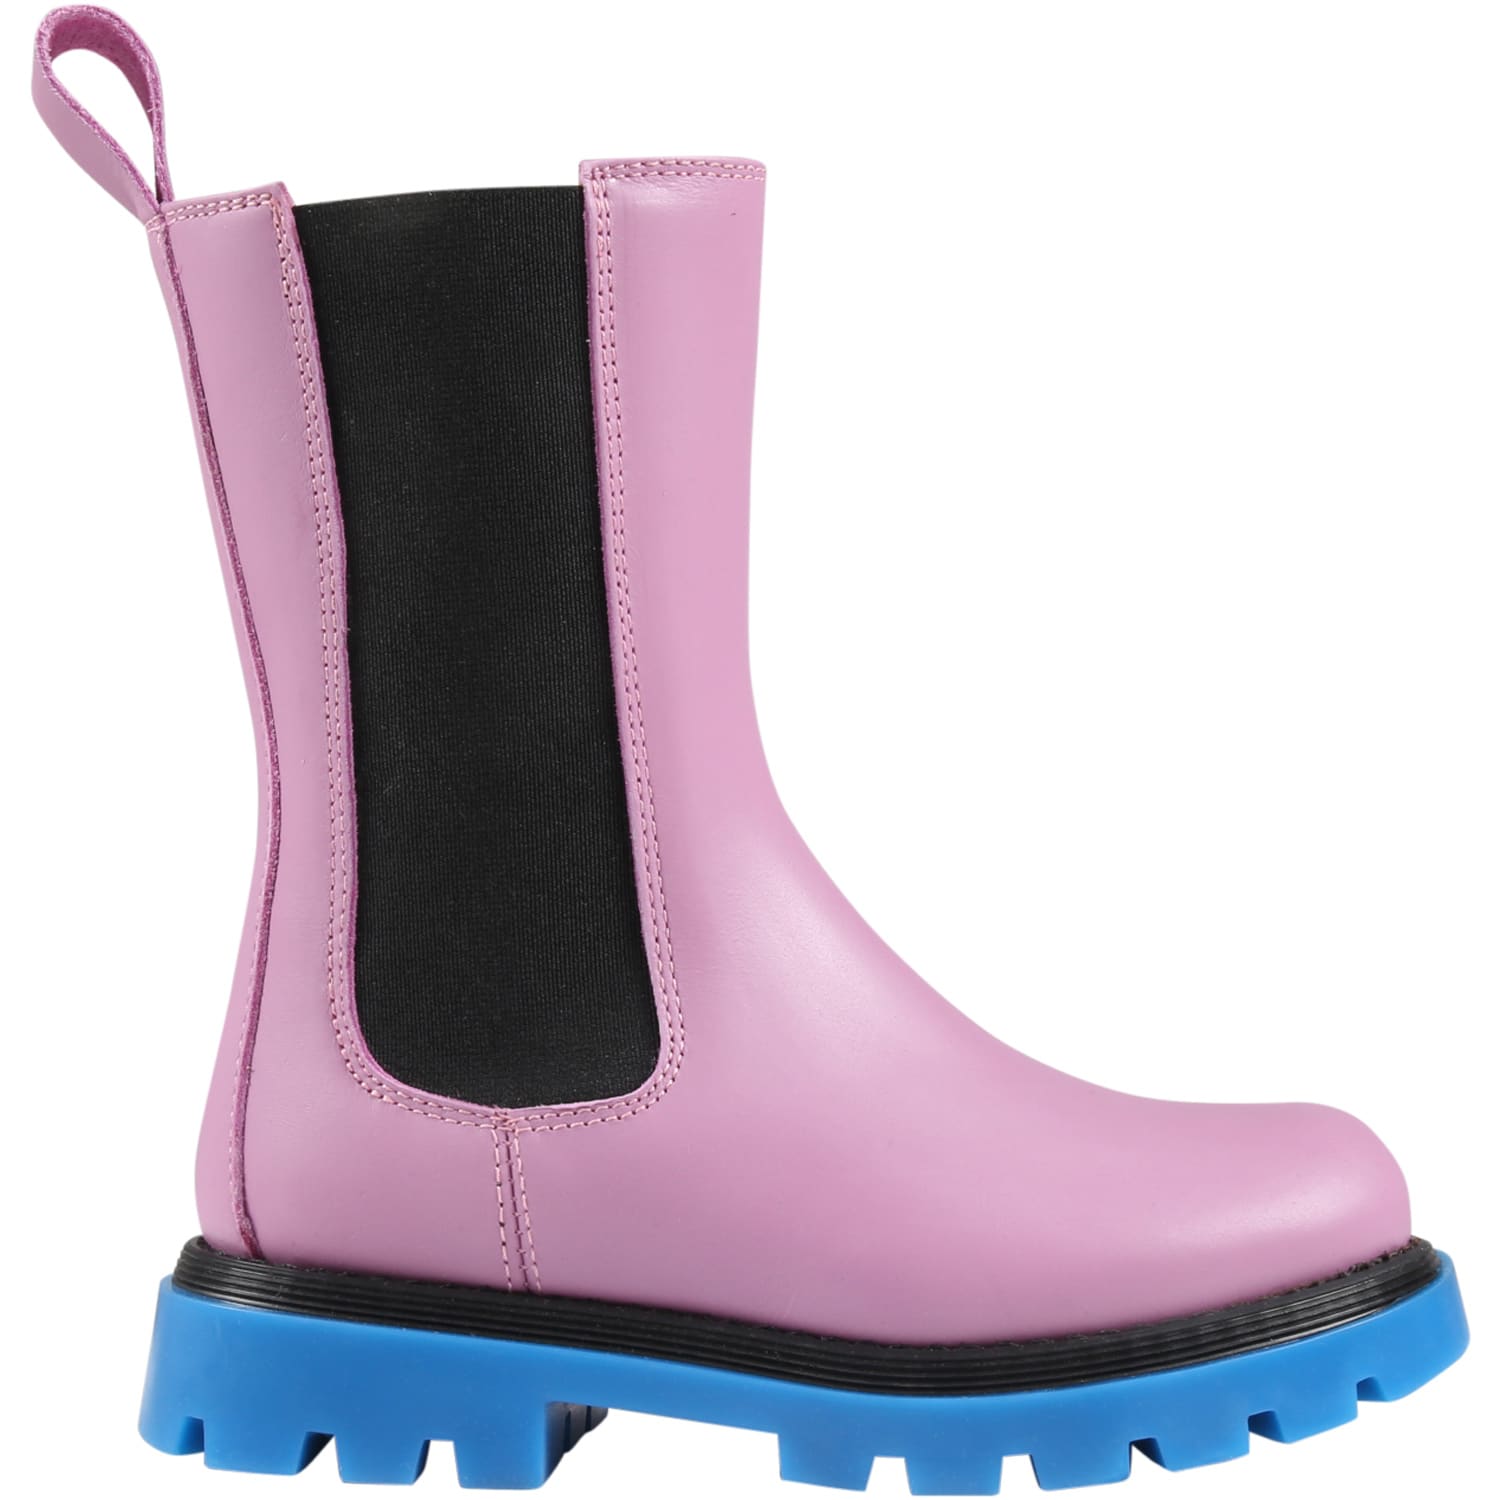 Simonetta Purple Boots For Girl With Light Blue Sole